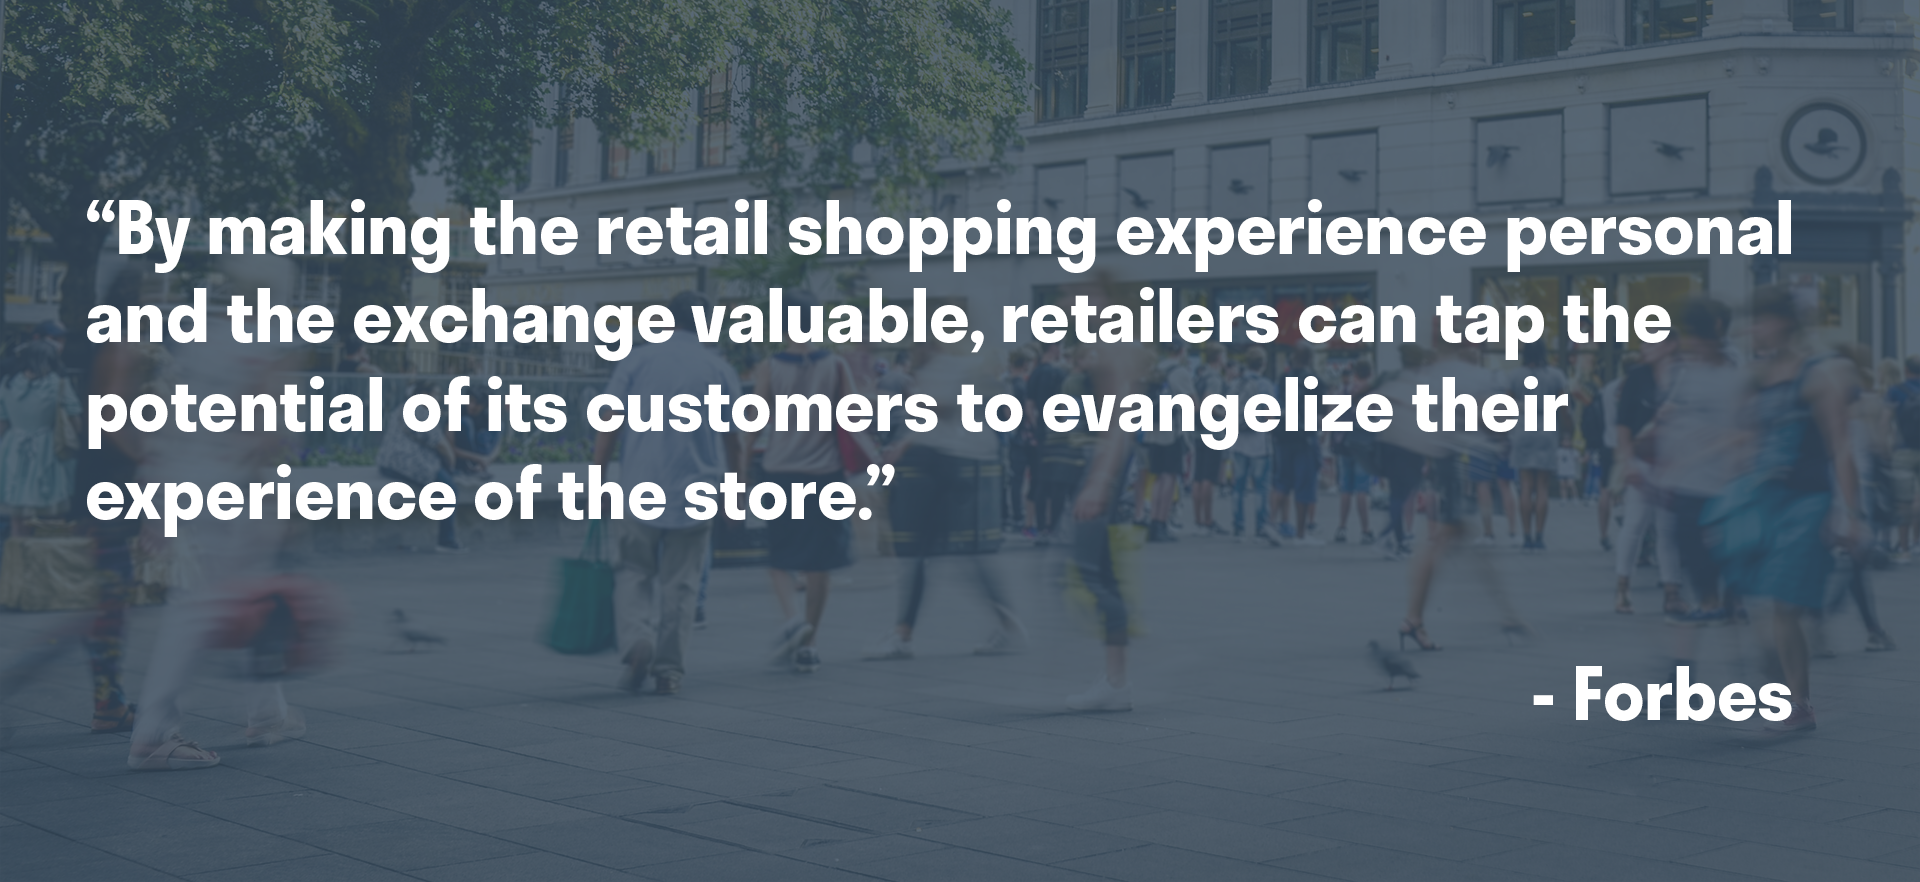 retail shopping experience